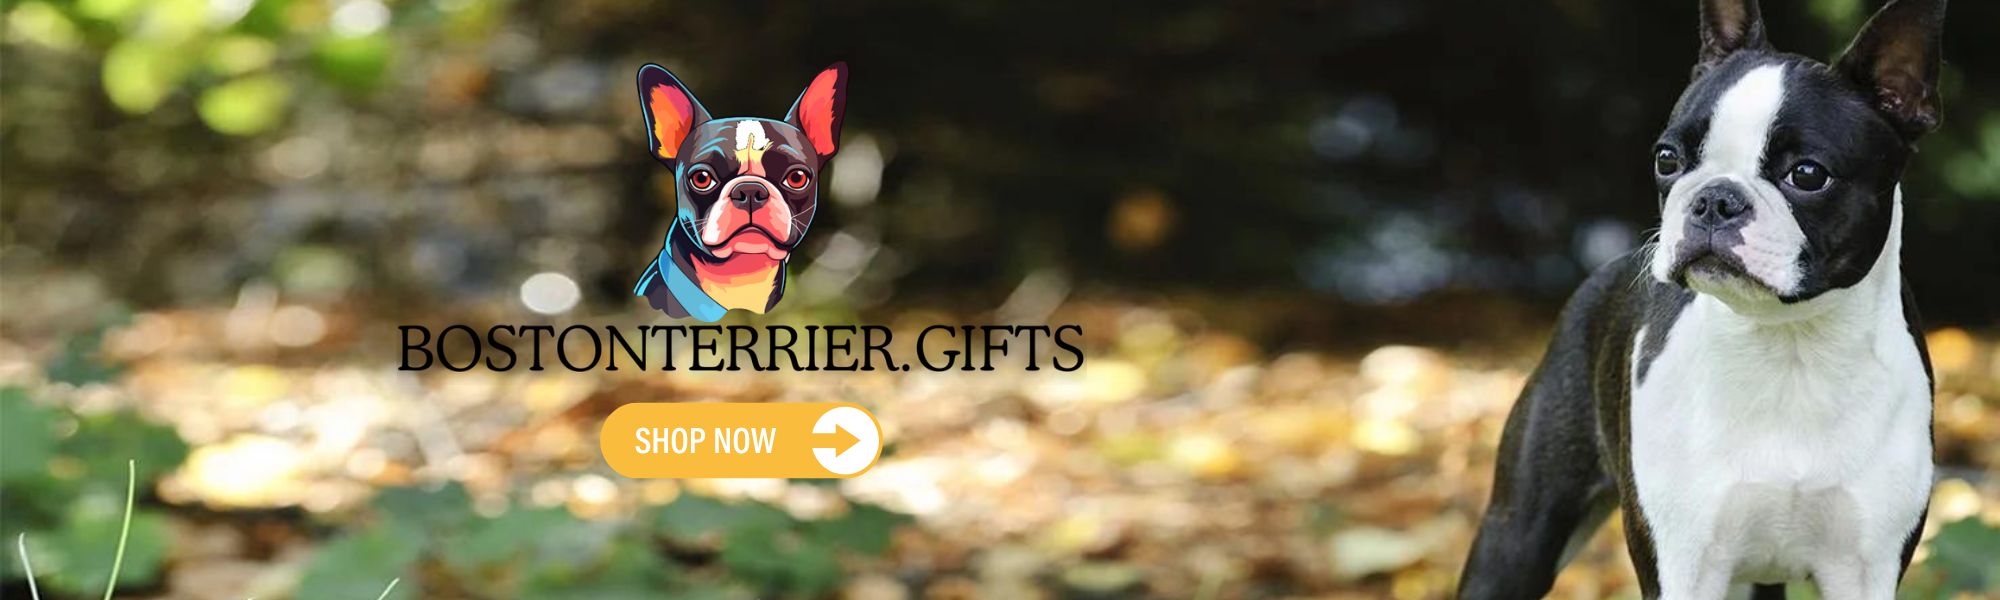 Boston Terrier Gifts Top Banner